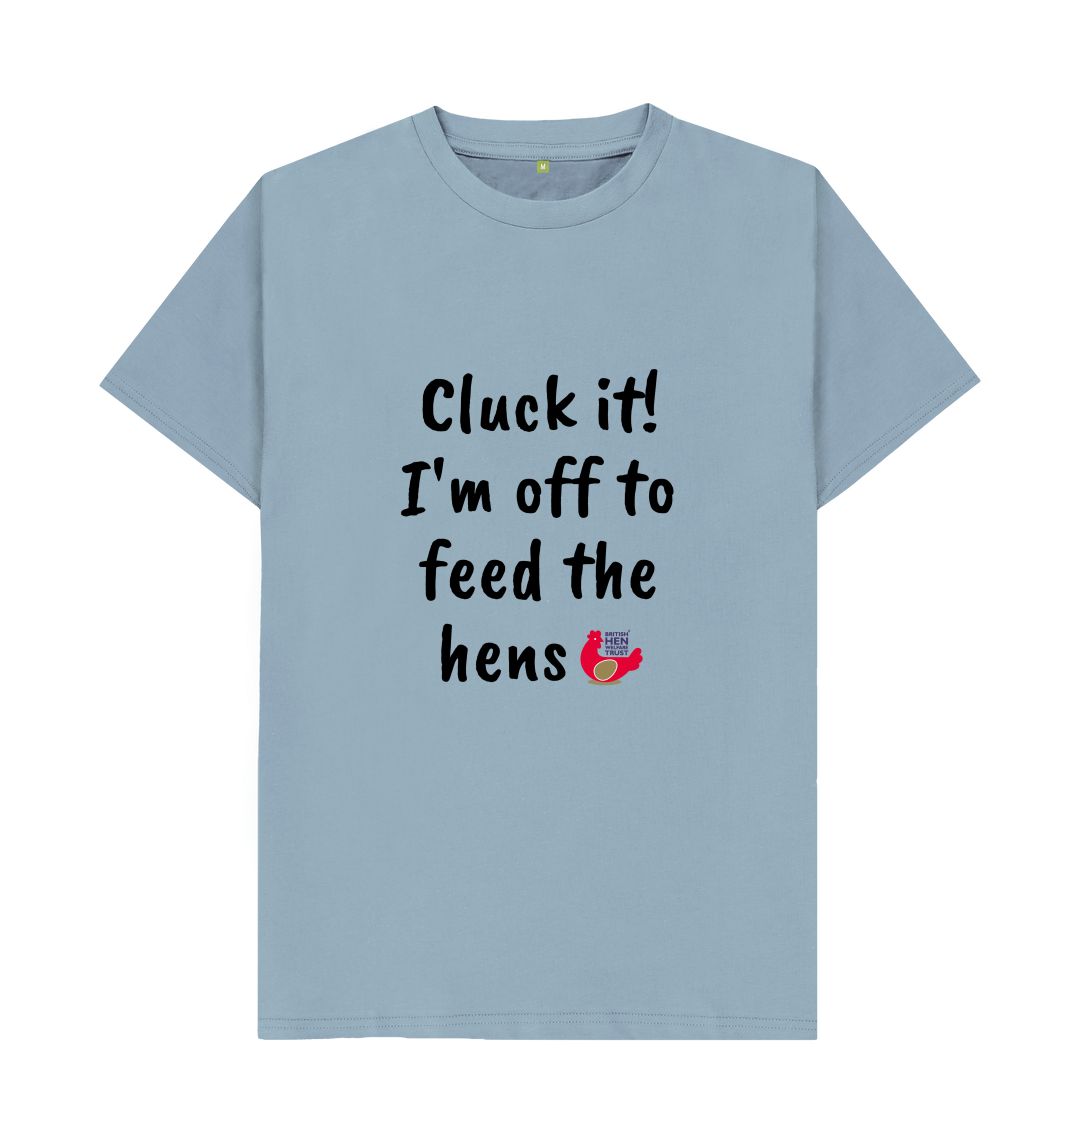 Stone Blue Cluck it! I'm off to feed the hens Unisex T-shirt